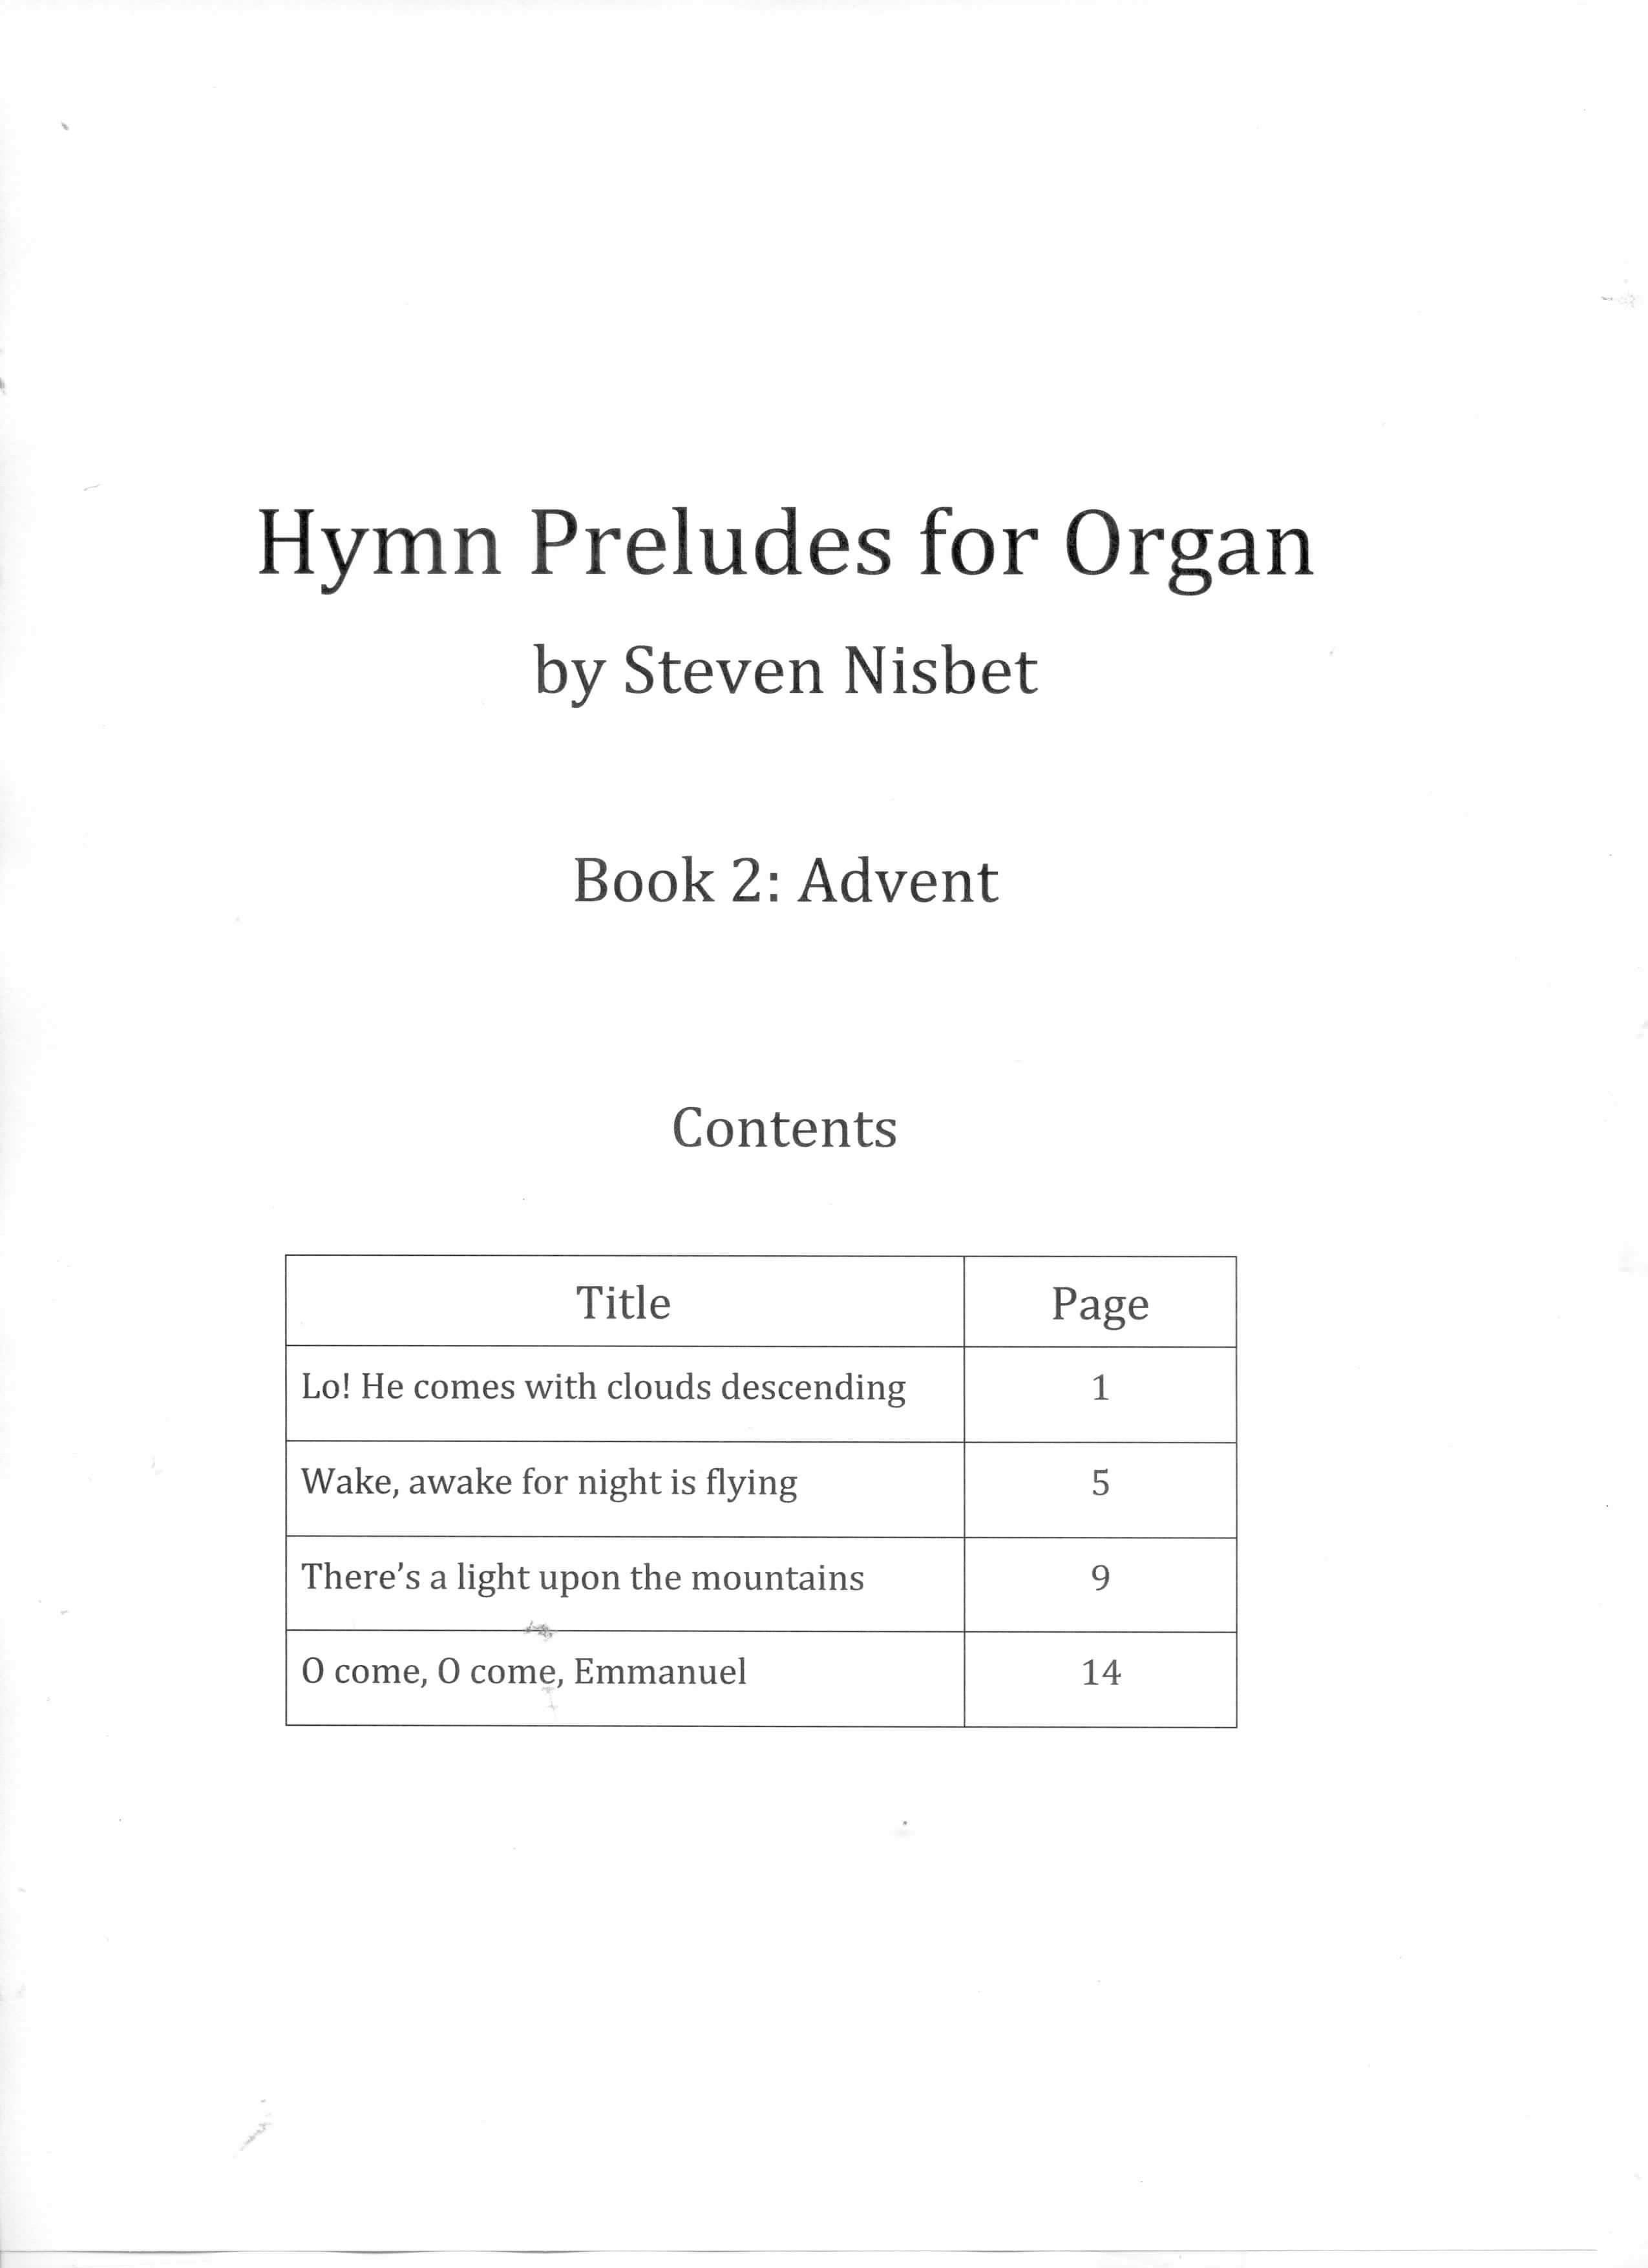 Hymn Preludes for Organ Book 2 Advent Contents Steven Nisbet